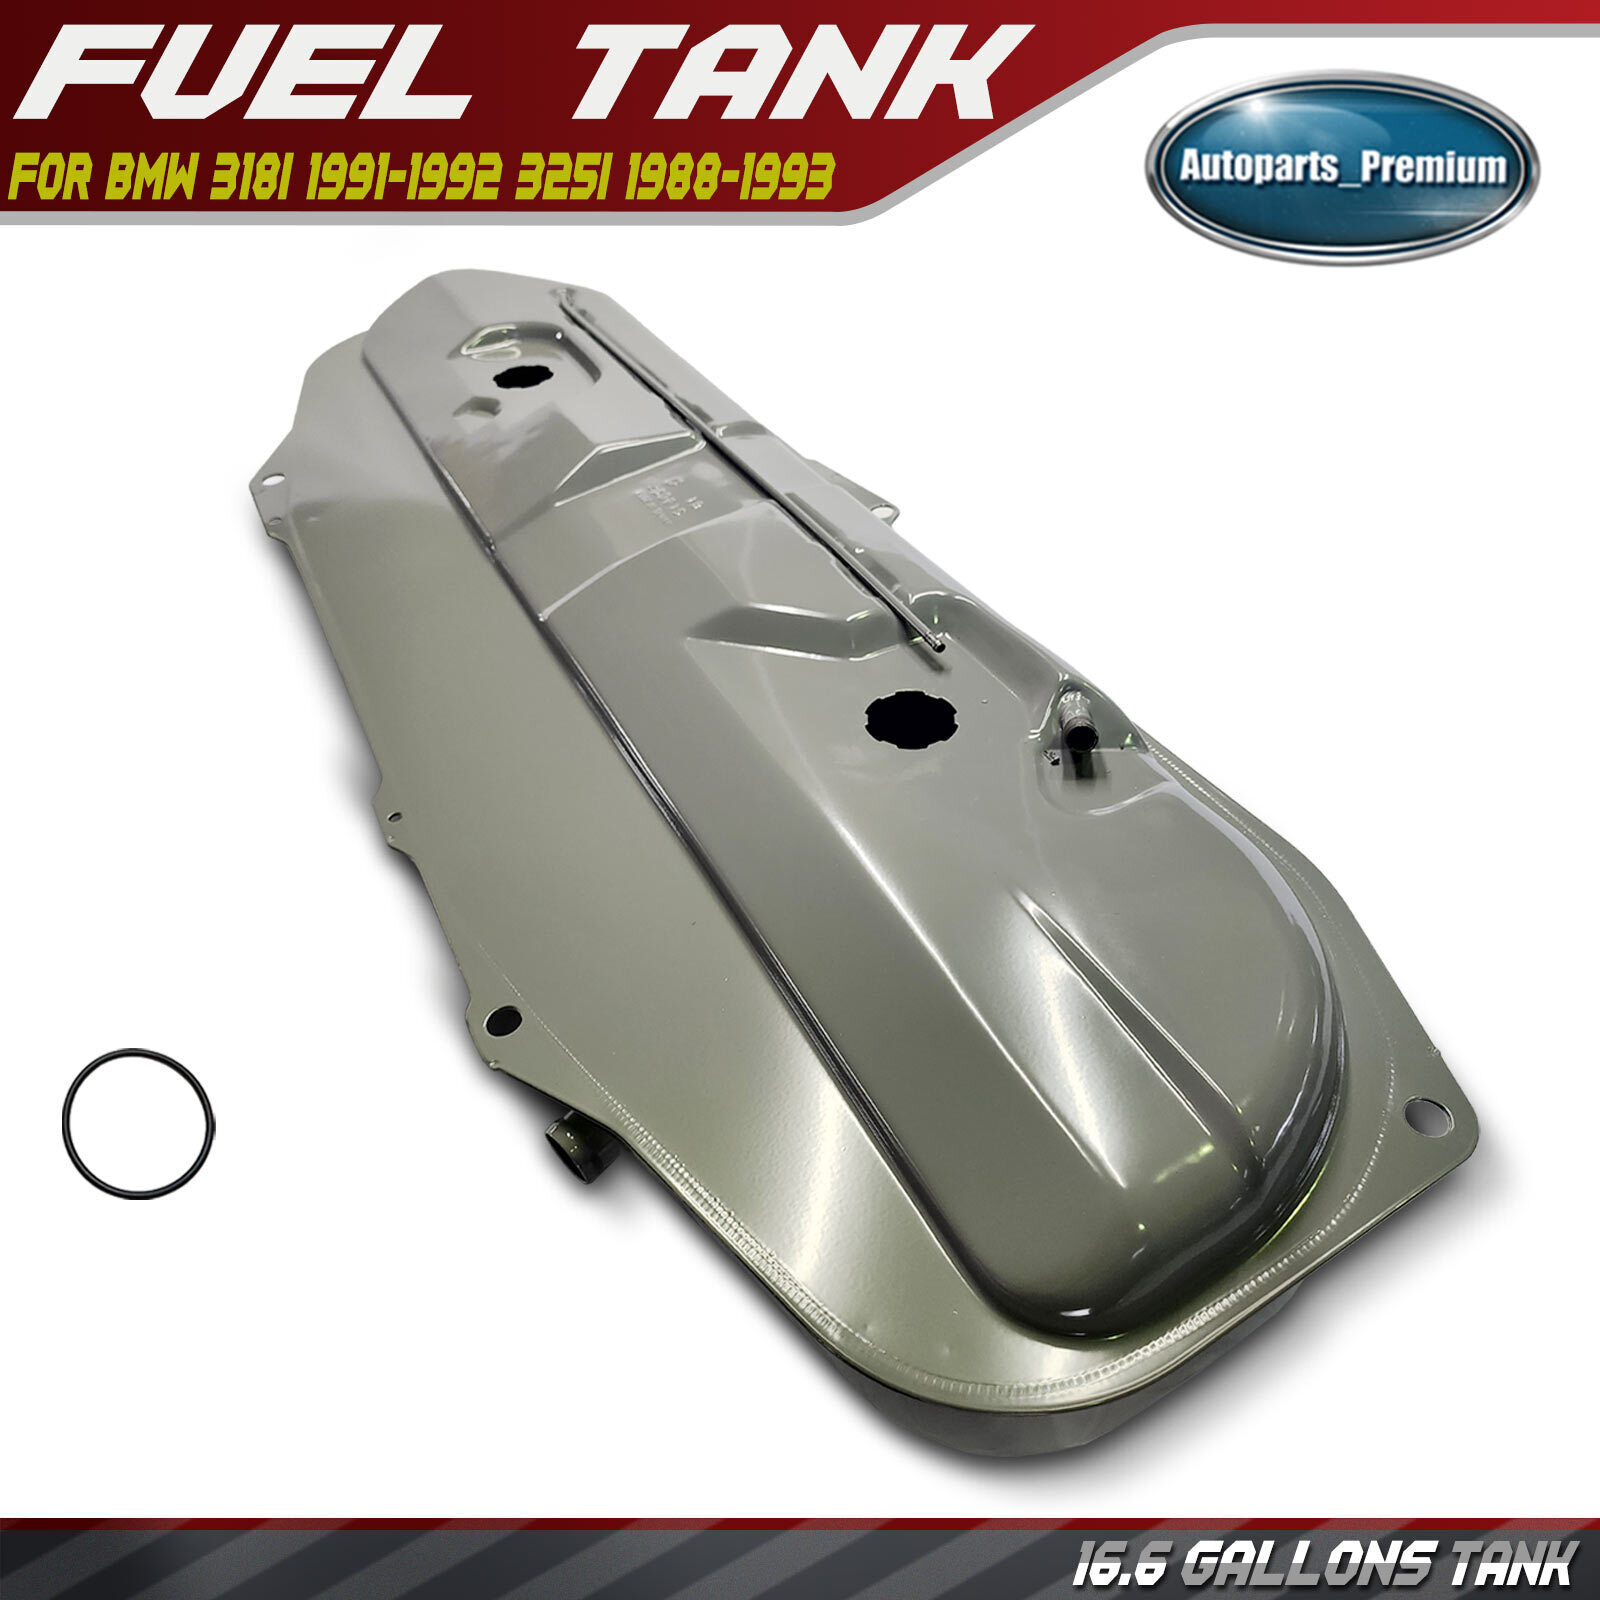 16.6 Gallons Fuel Tank for BMW 318i 1991-1992 325i 325is 1988-1993 M3 1988-1991